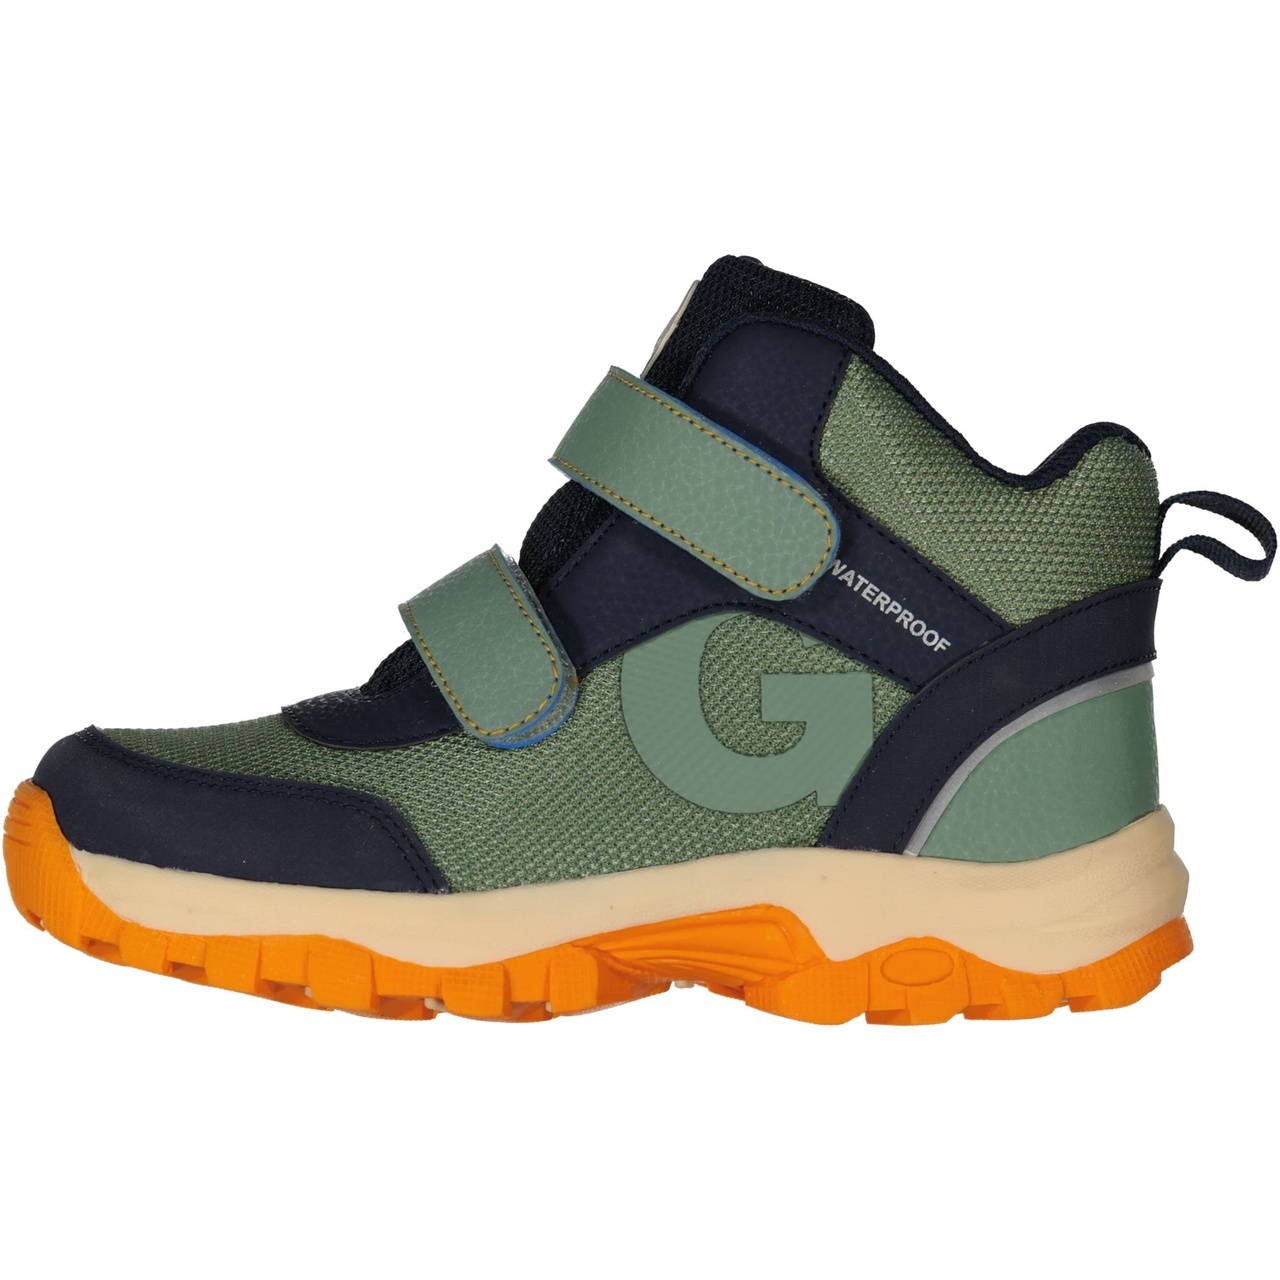 All weather shoes Moss green  38 (25,3 cm)